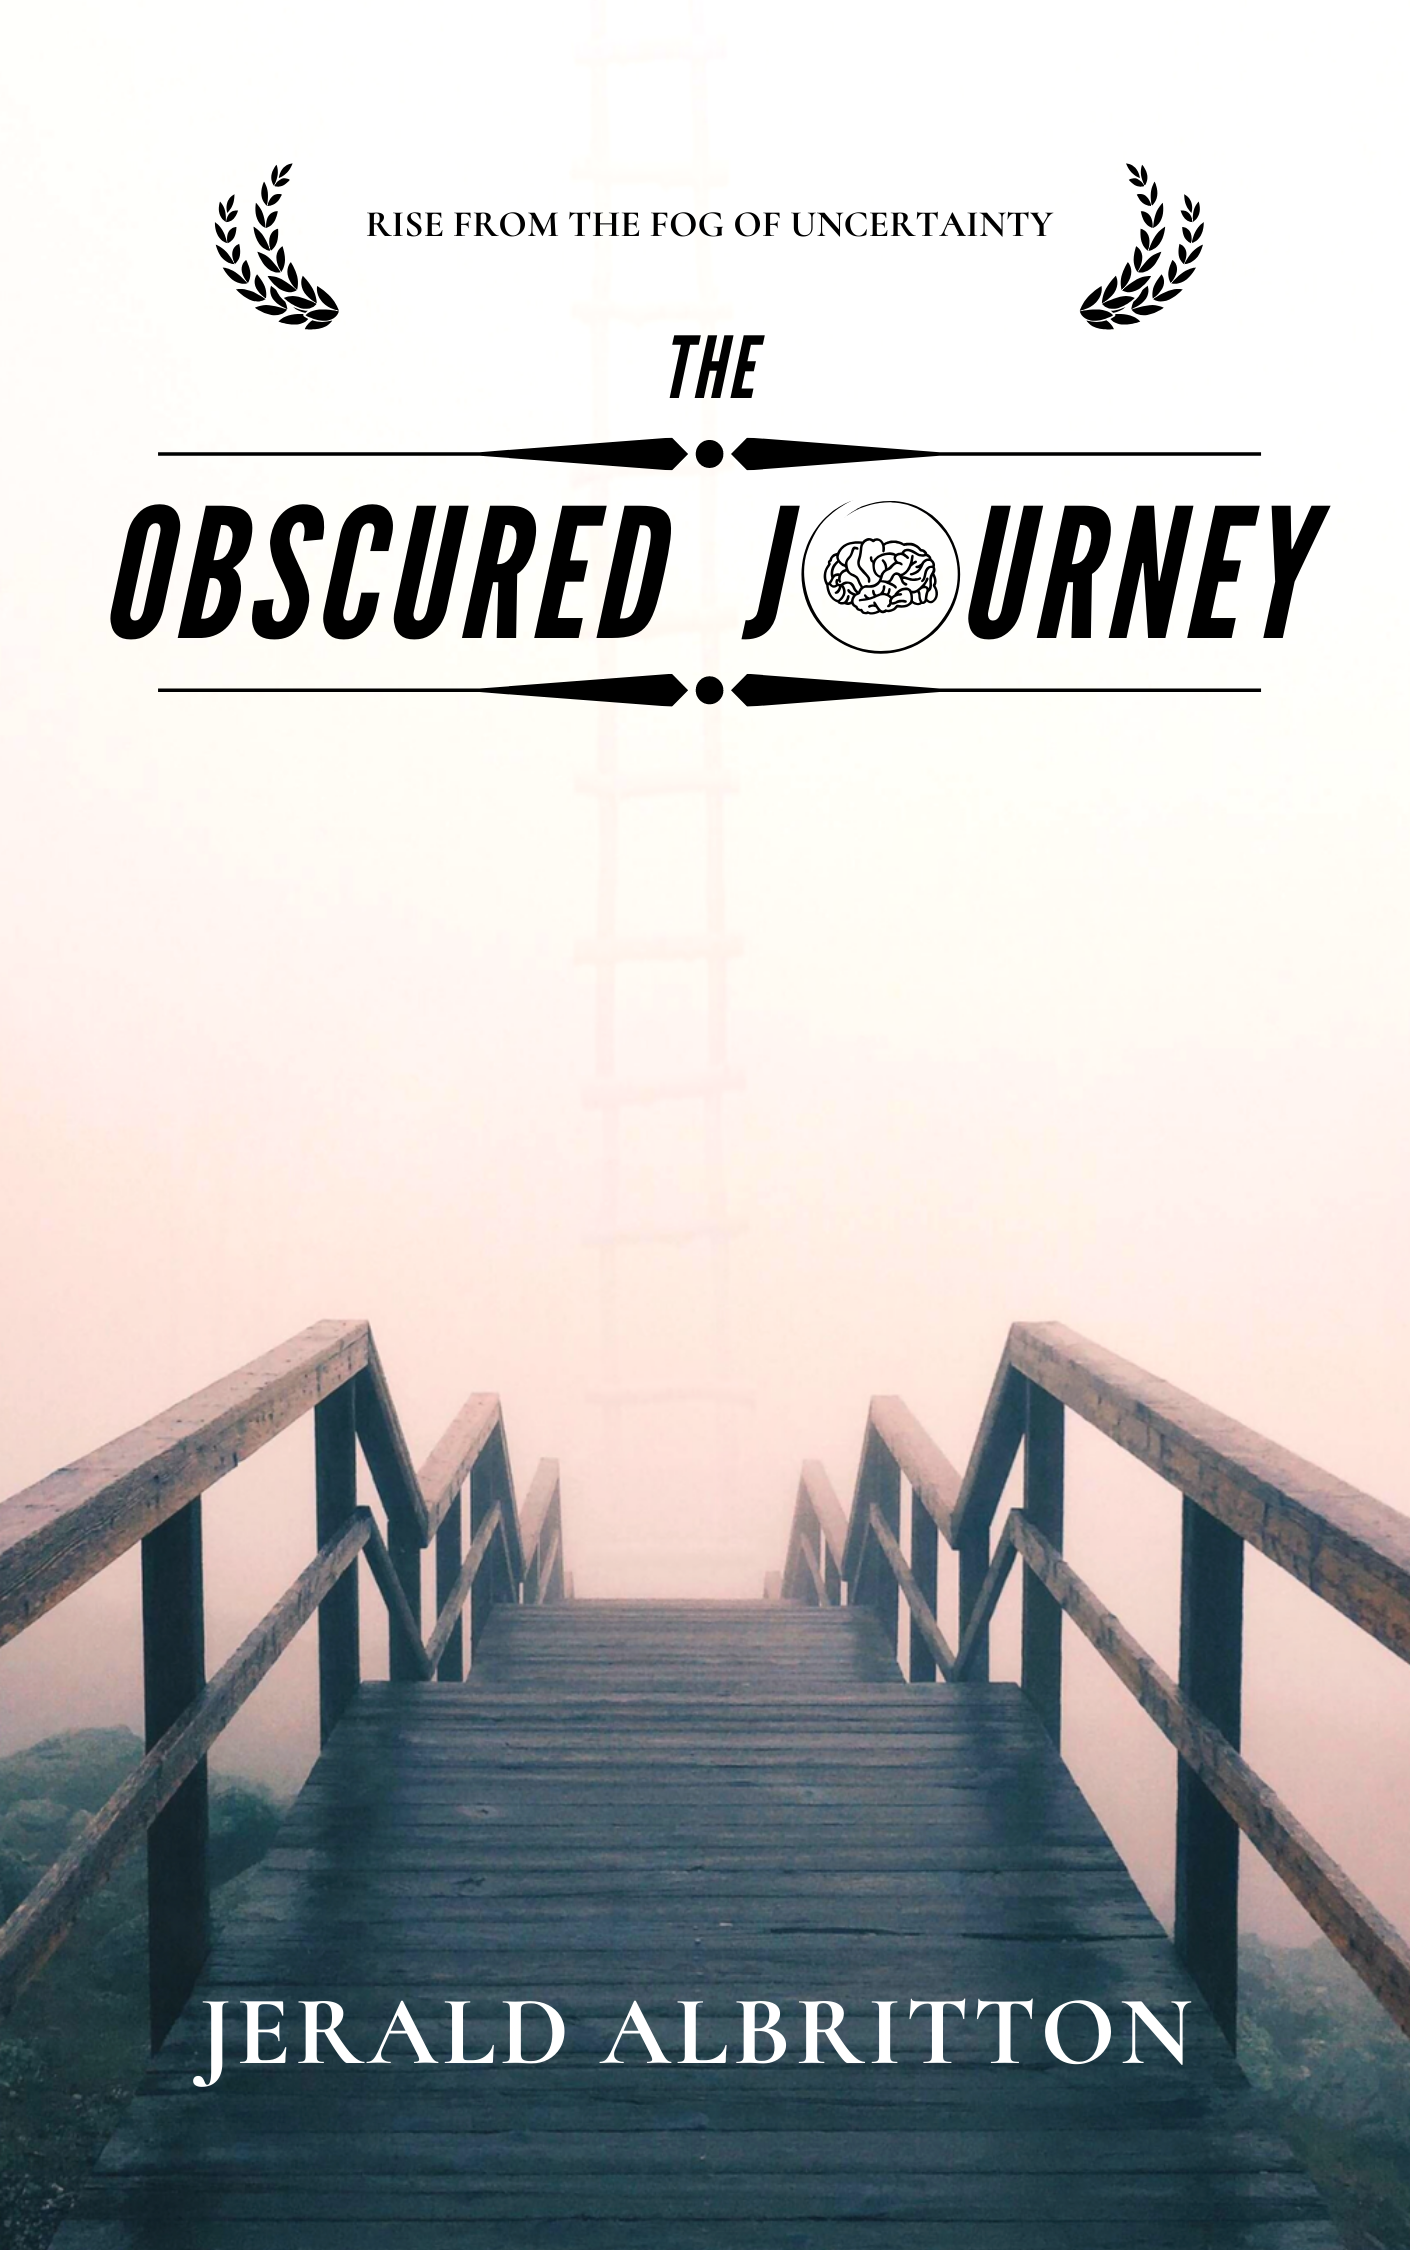 FREE: The Obscured Journey by Jerald Albritton